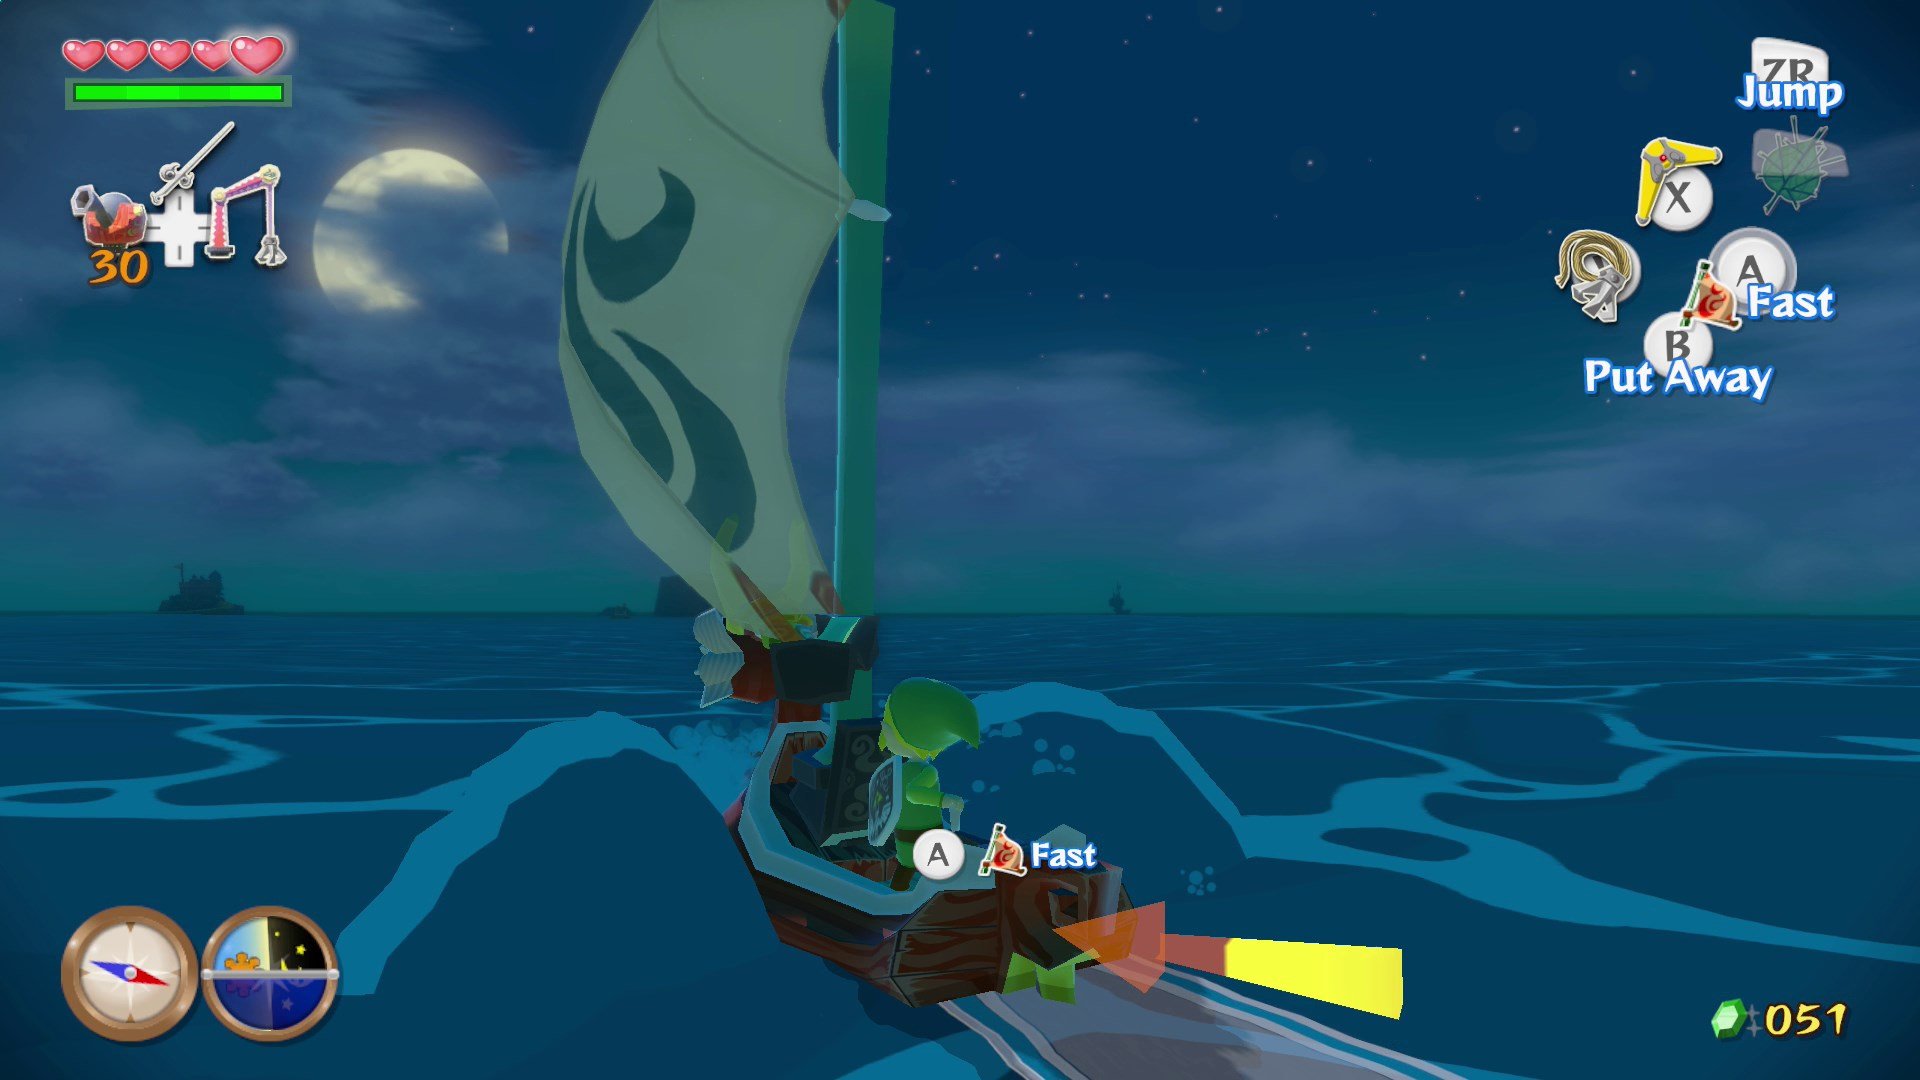 how to defeat the flying monsters on legend of zelda wind waker